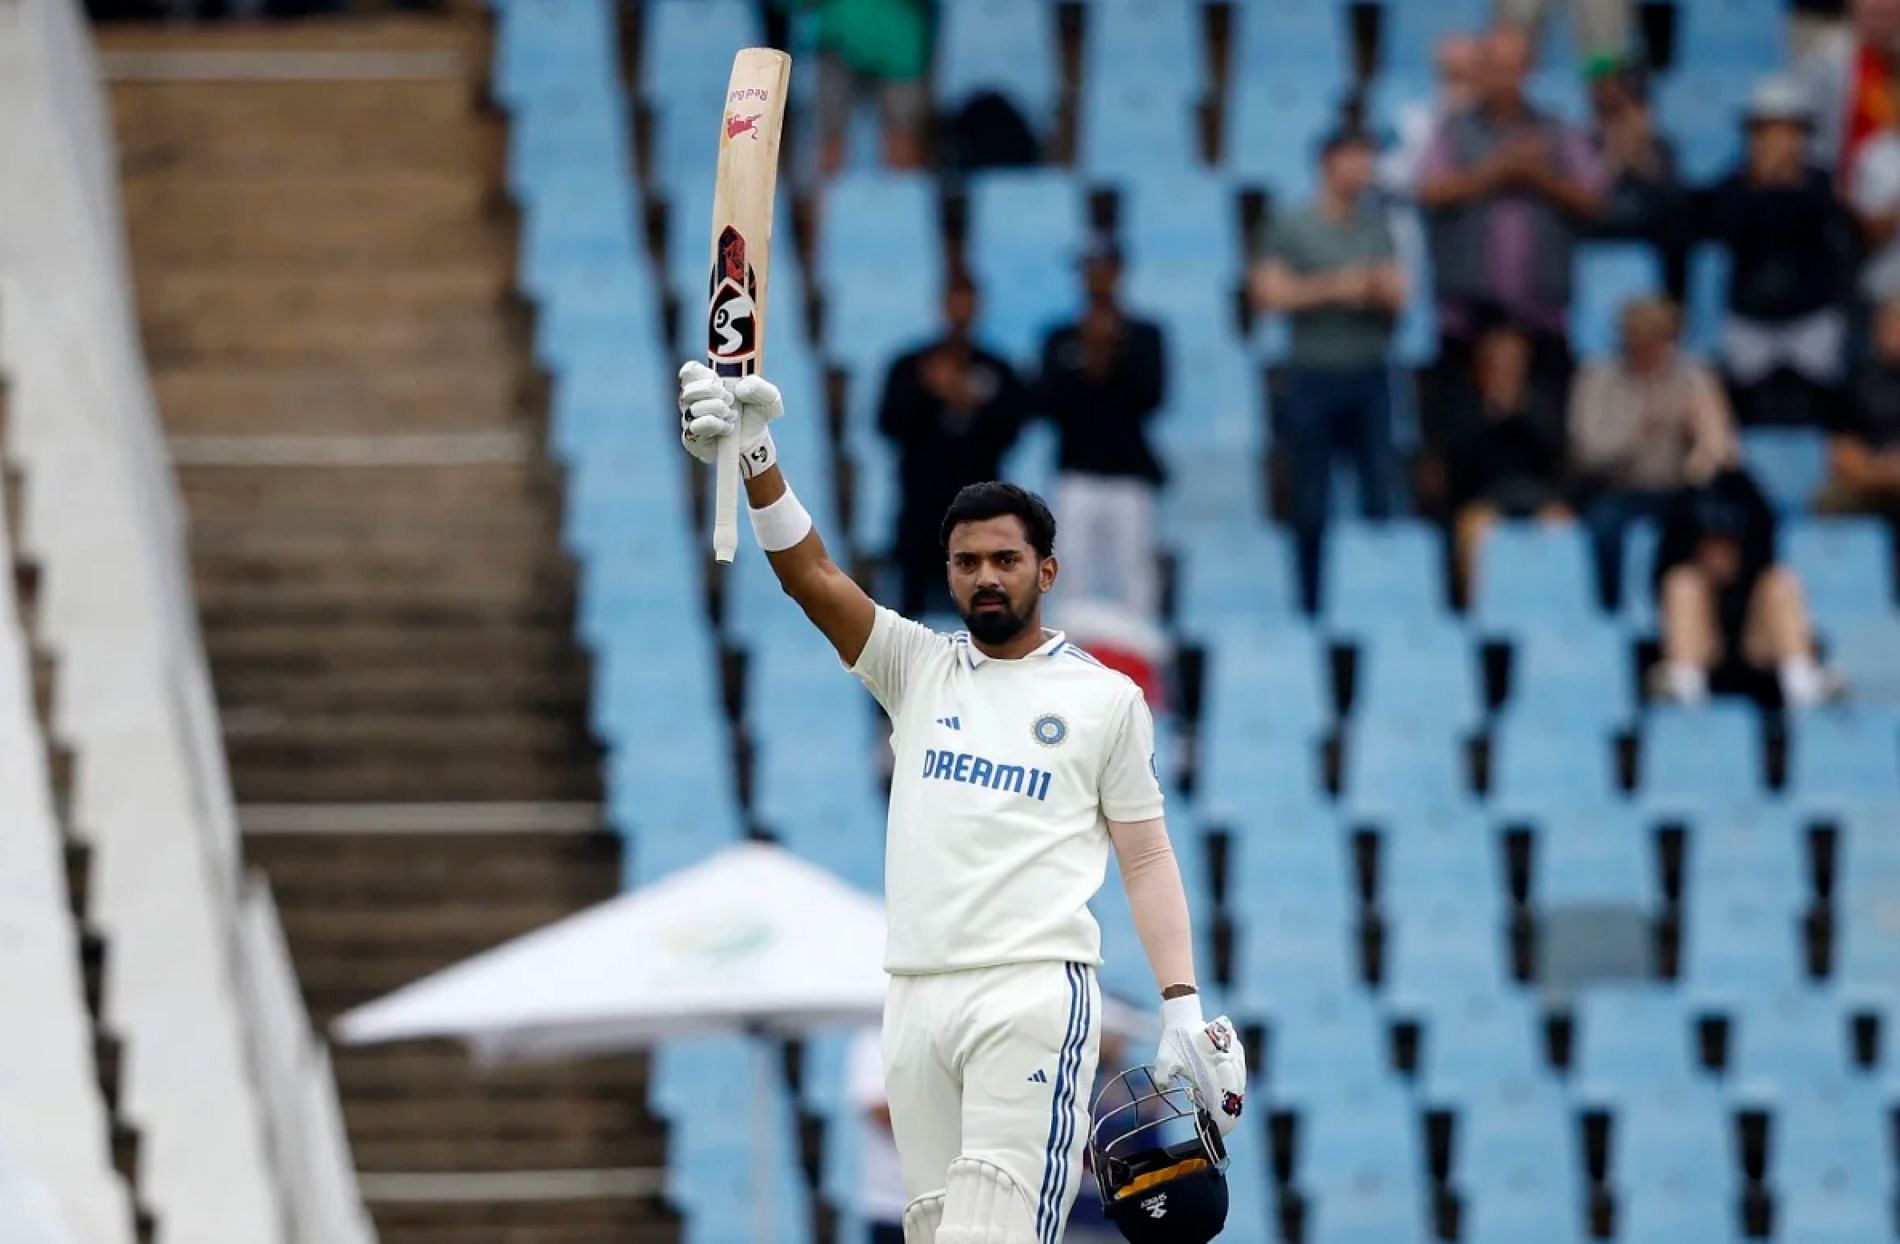 KL Rahul scored a breathtaking century in the opening Test in Centurion.